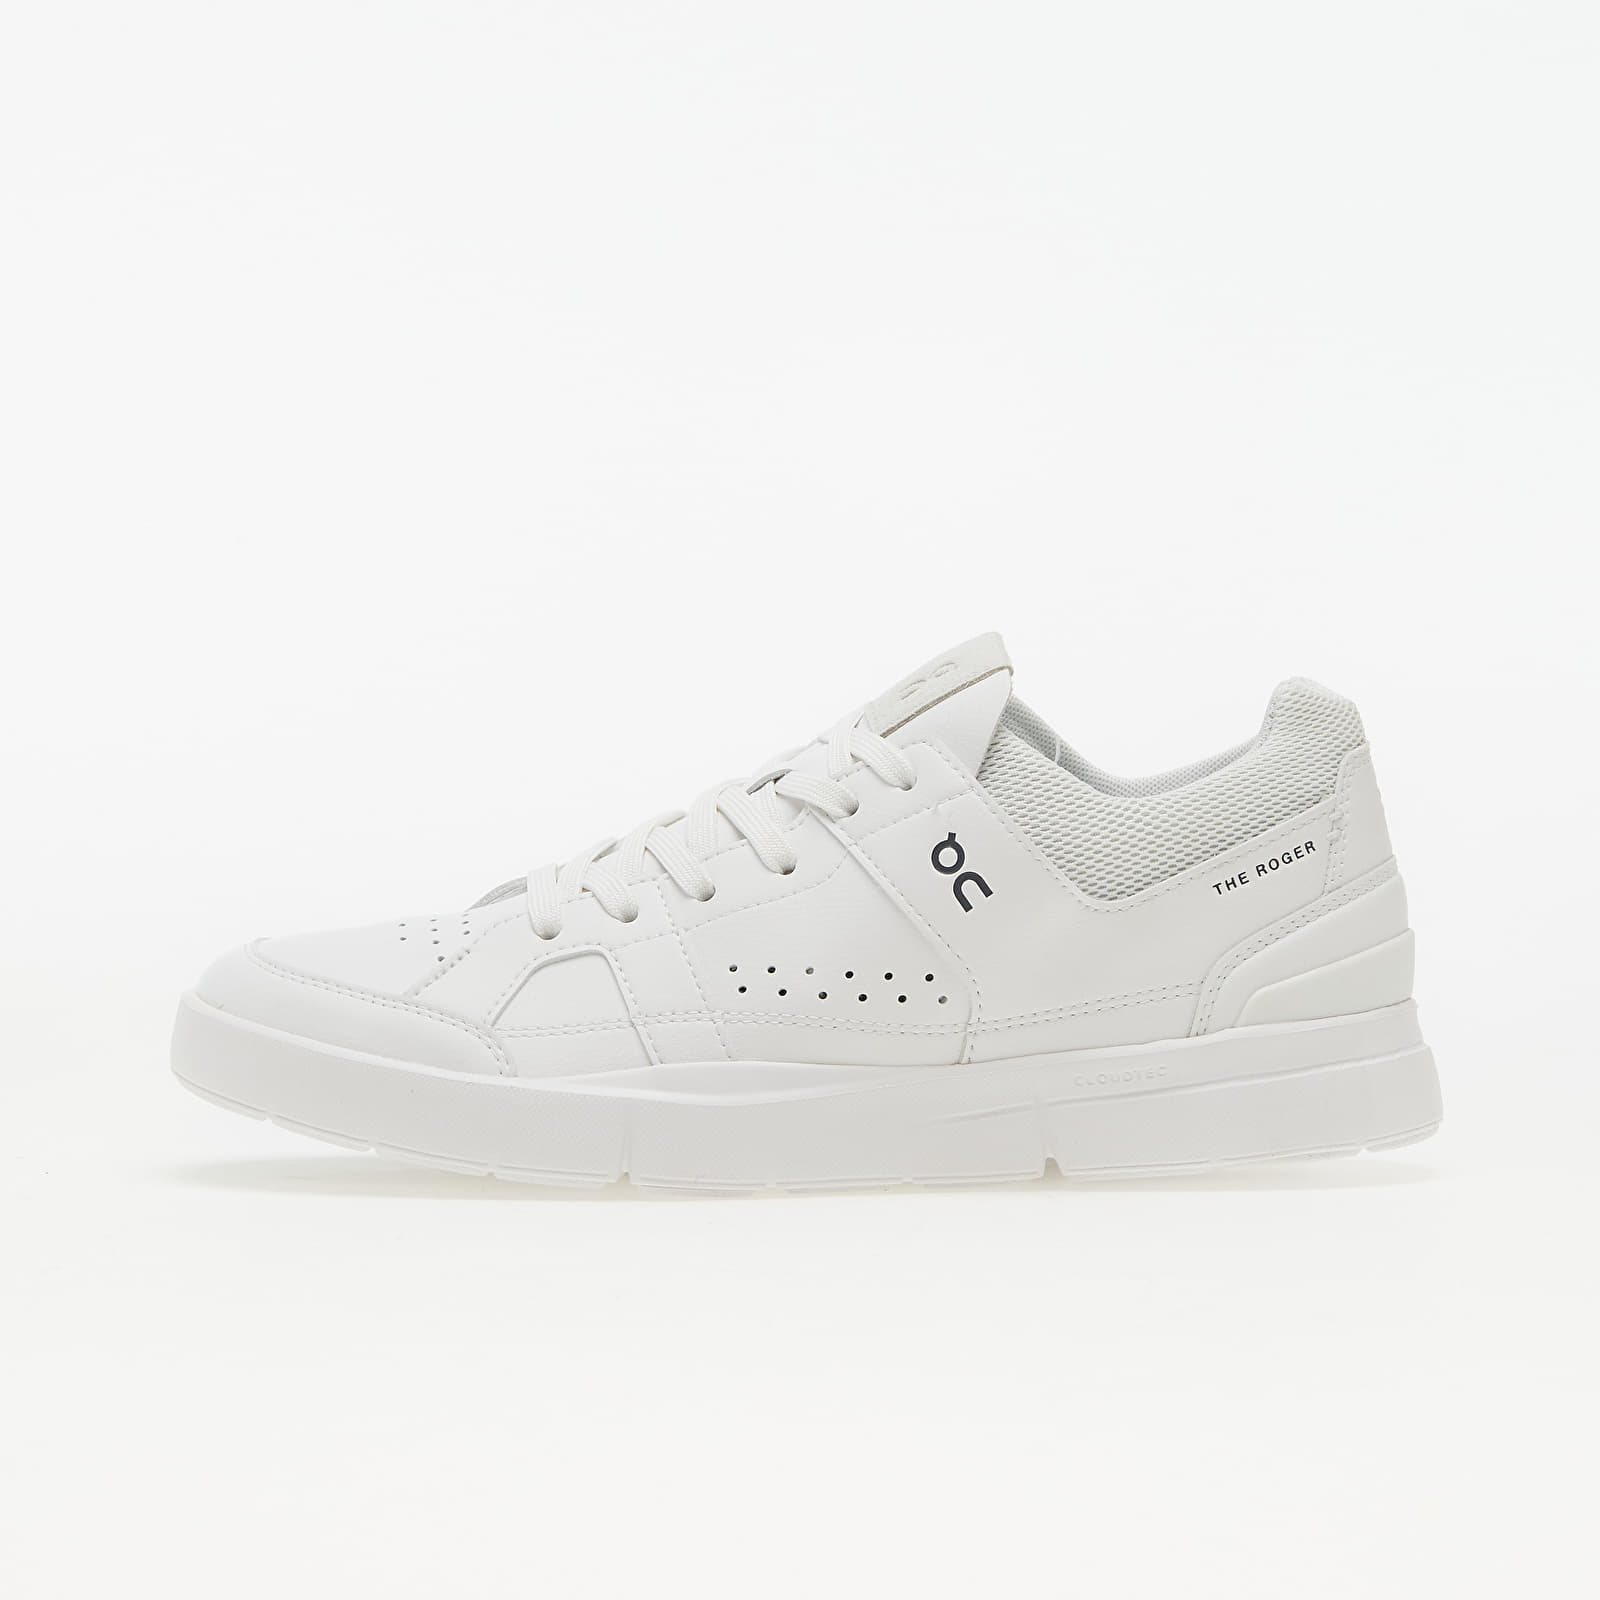 Chaussures et baskets homme On The Roger Clubhouse All White